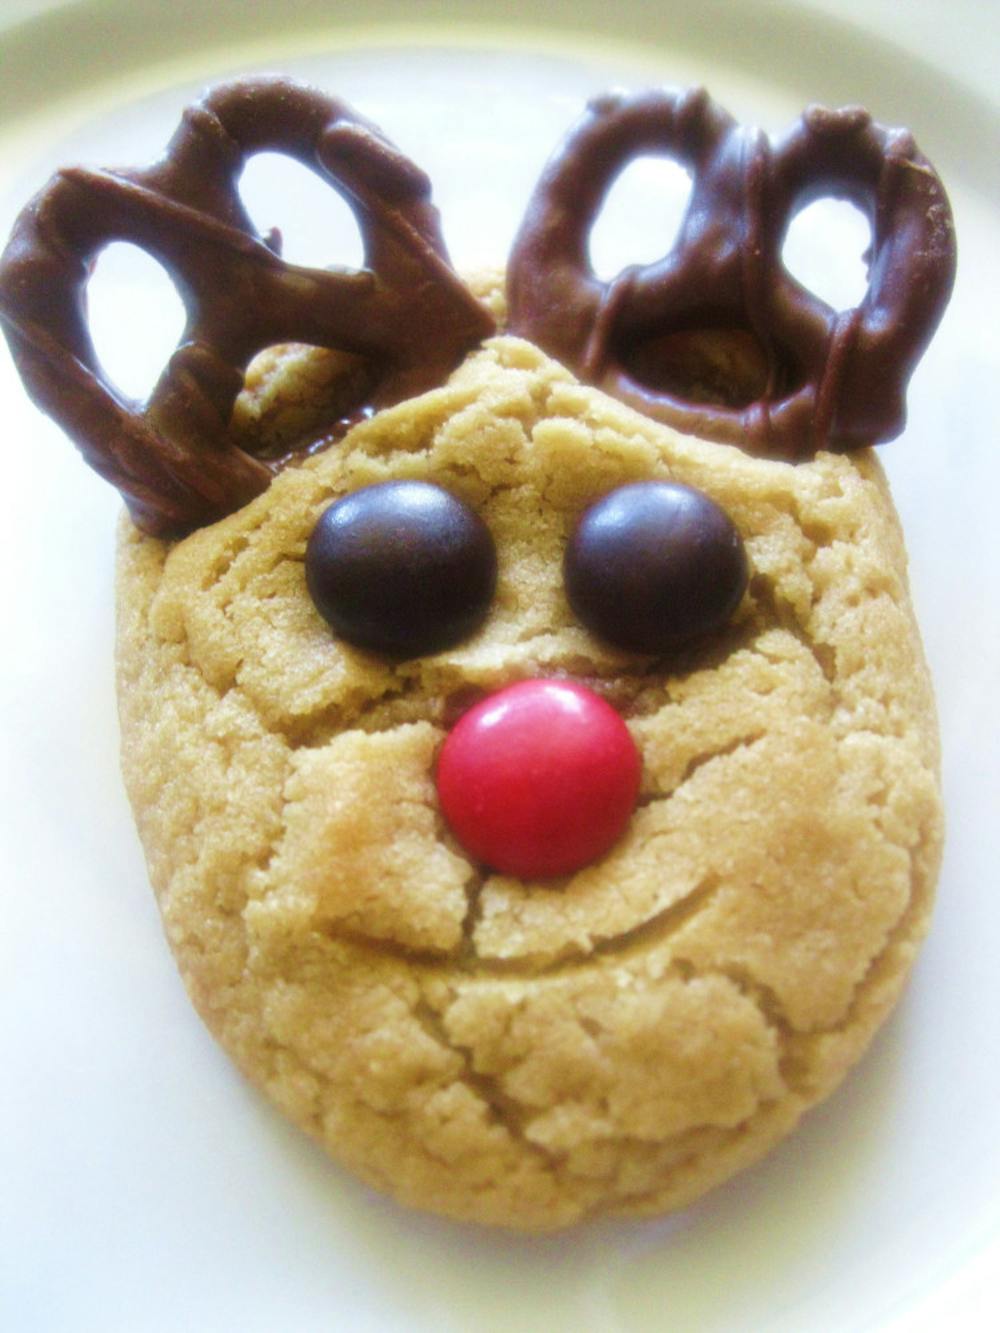 Reindeer peanut butter cookies are cute holiday treat